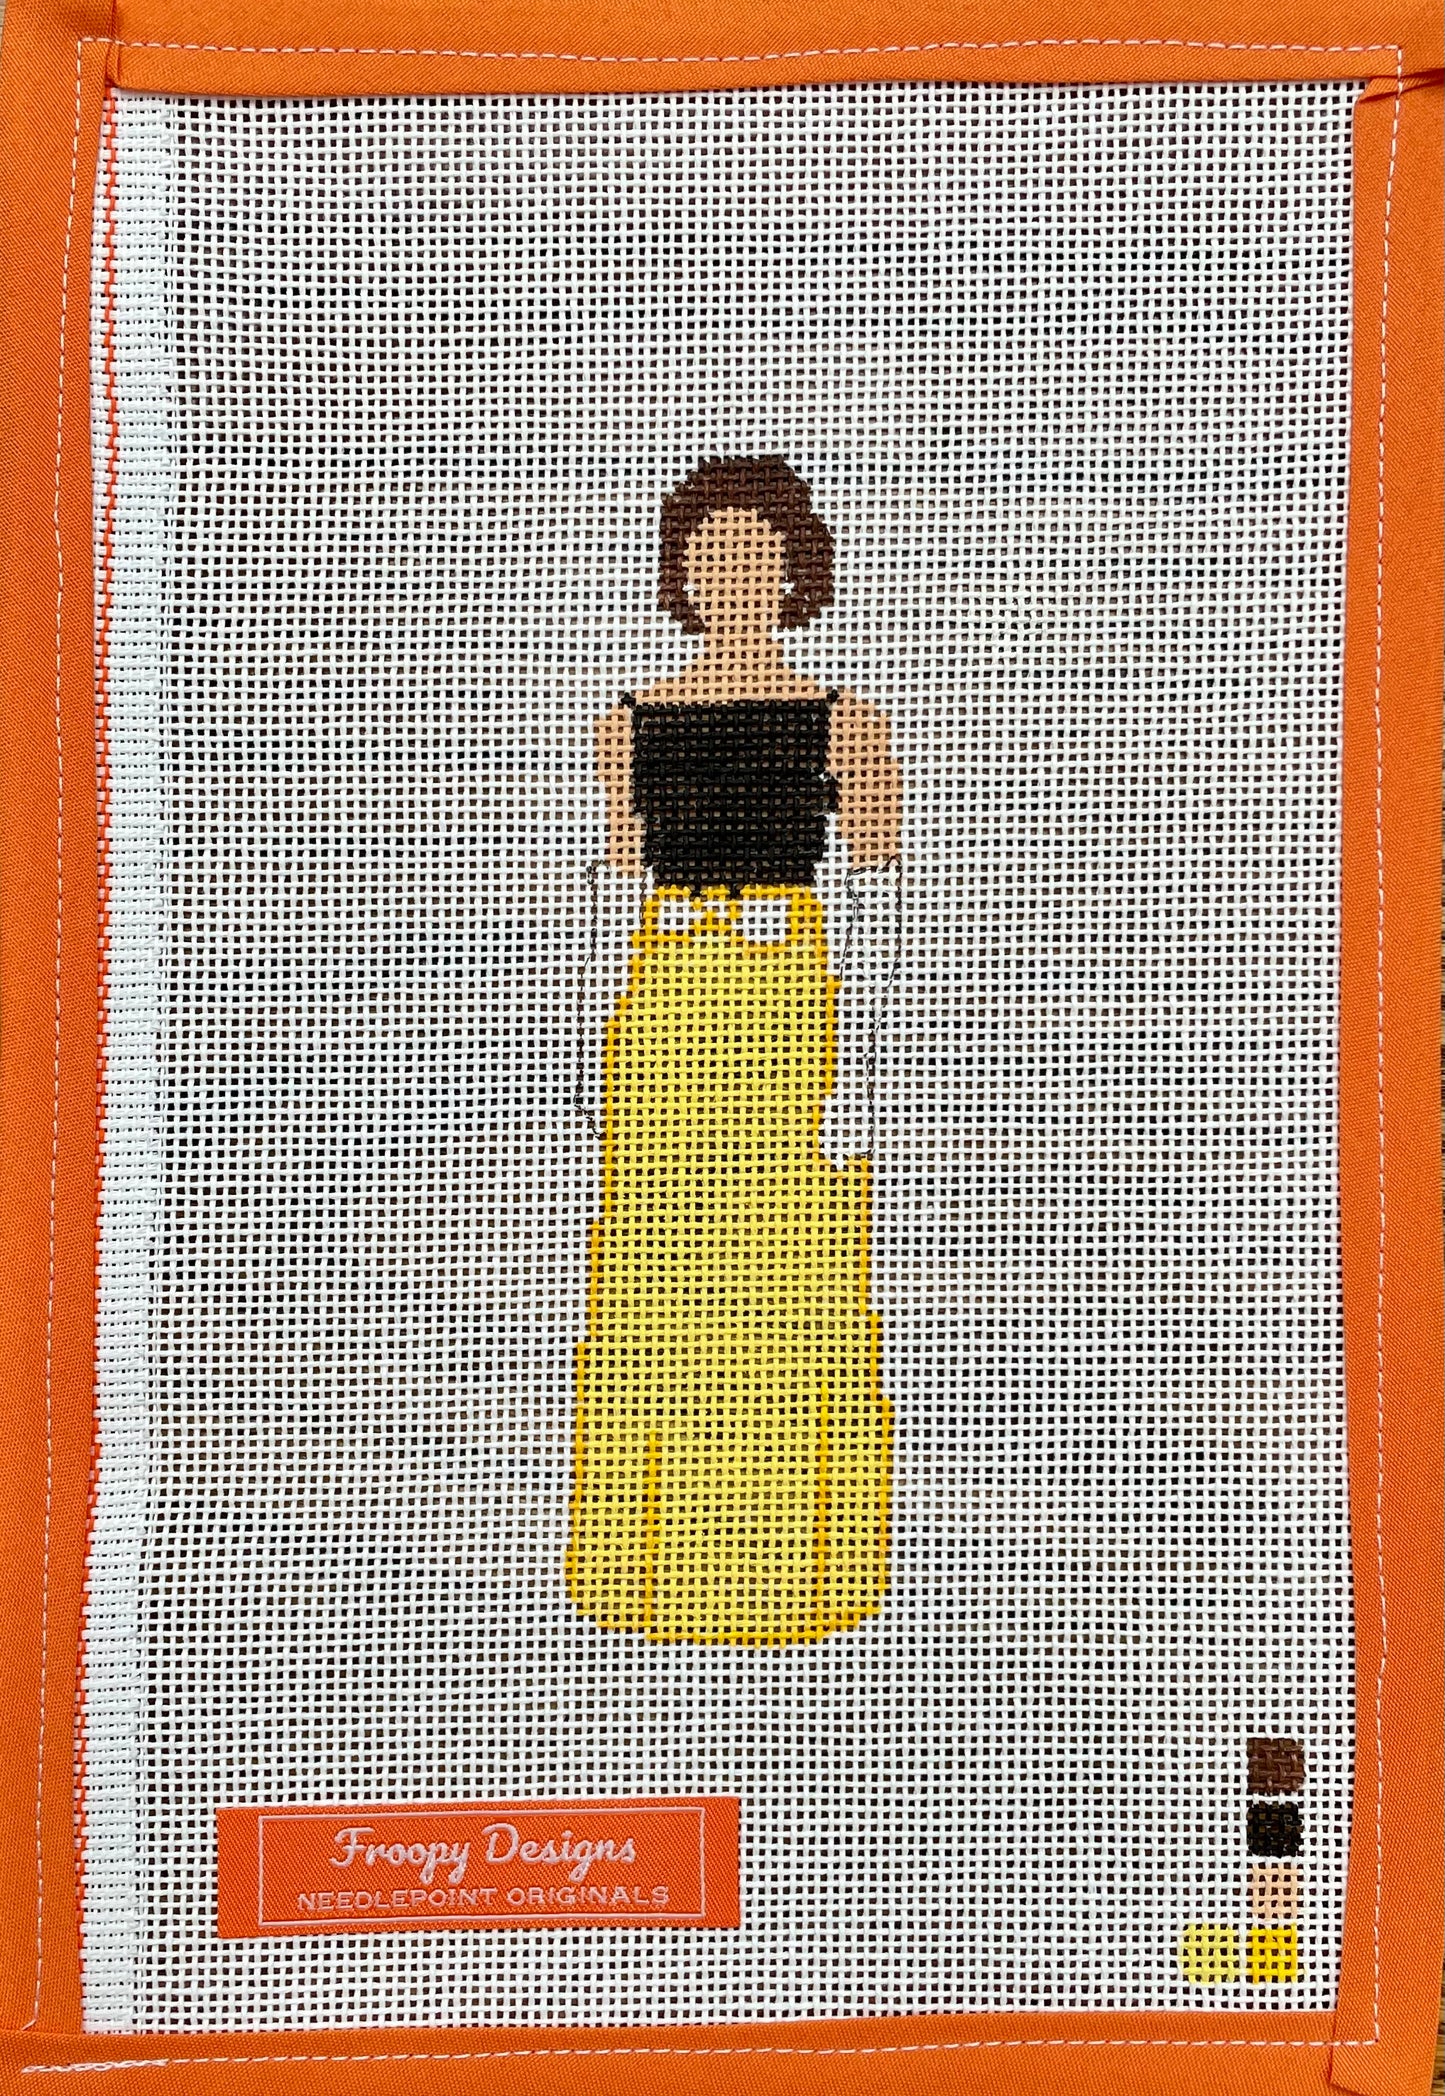 FD20 “JACKIE IN YELLOW”,  5.5” x 2.5” on 18 mesh